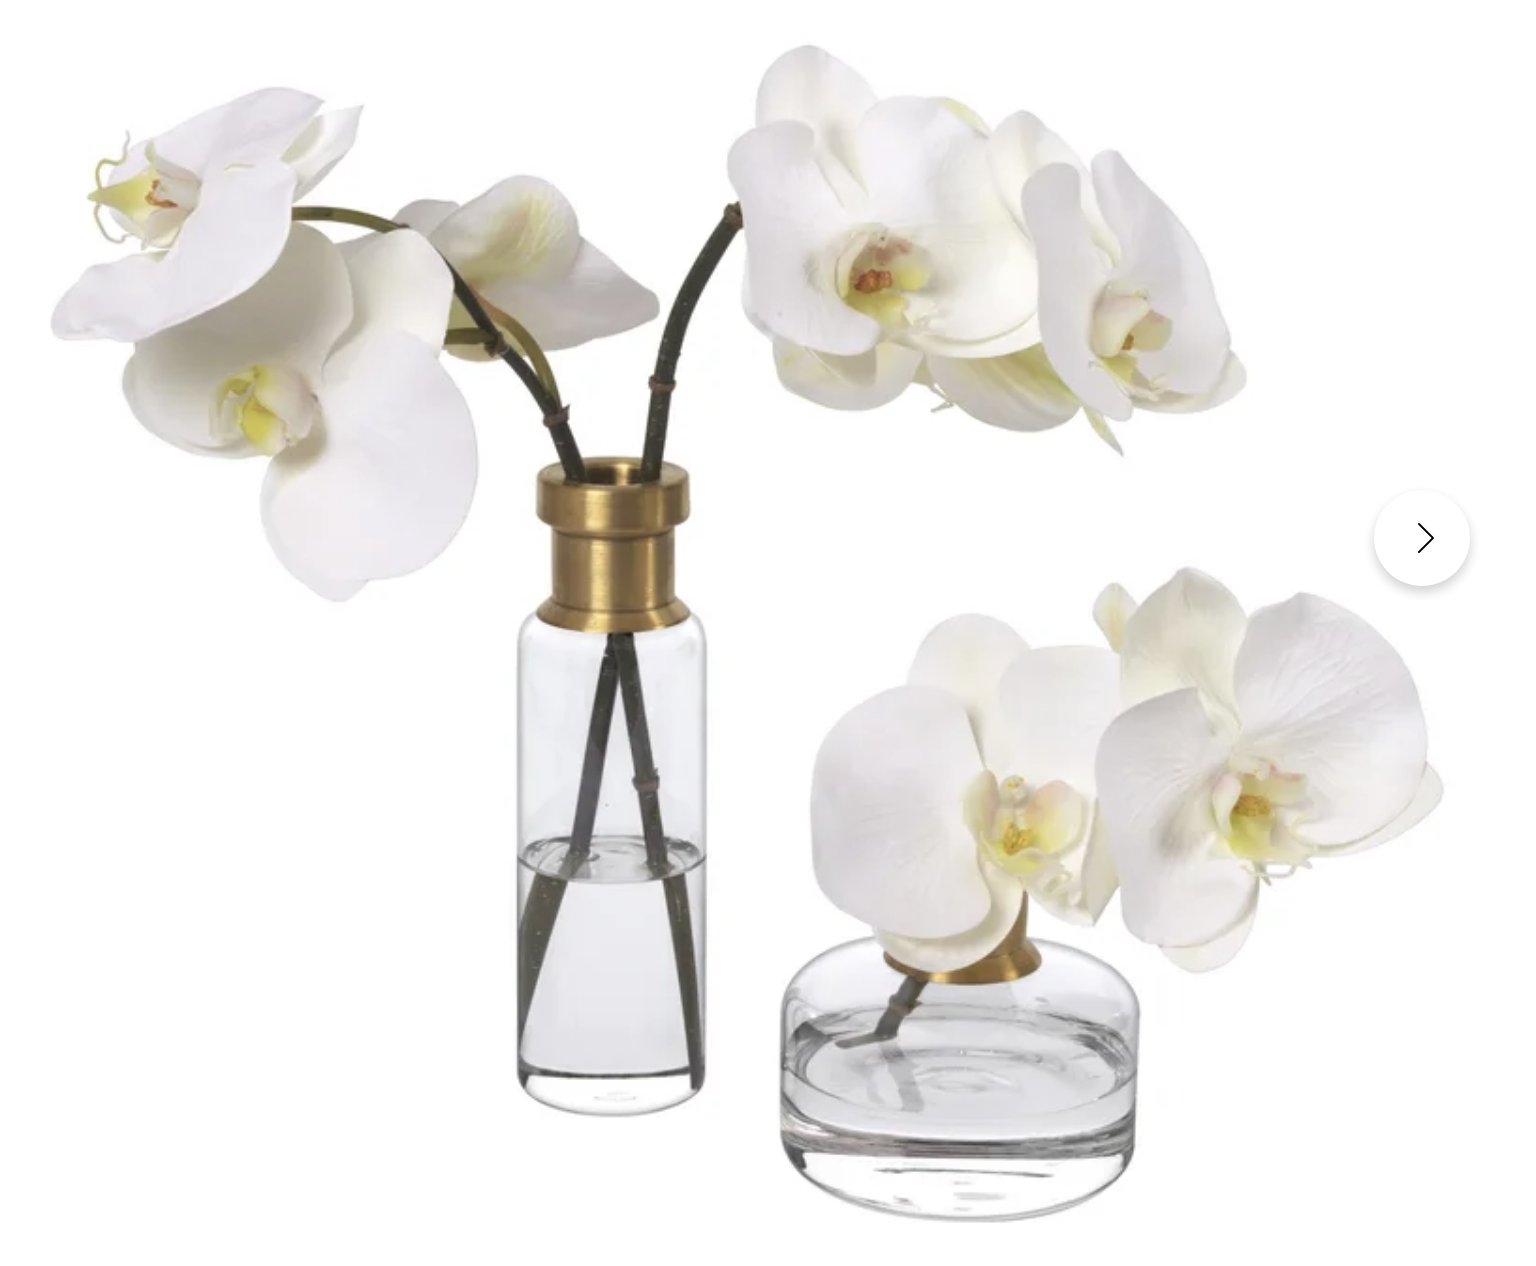 Diane James Home Phalaenopsis Orchids In Glass Bud Vases / Set Of 2 - Image 0